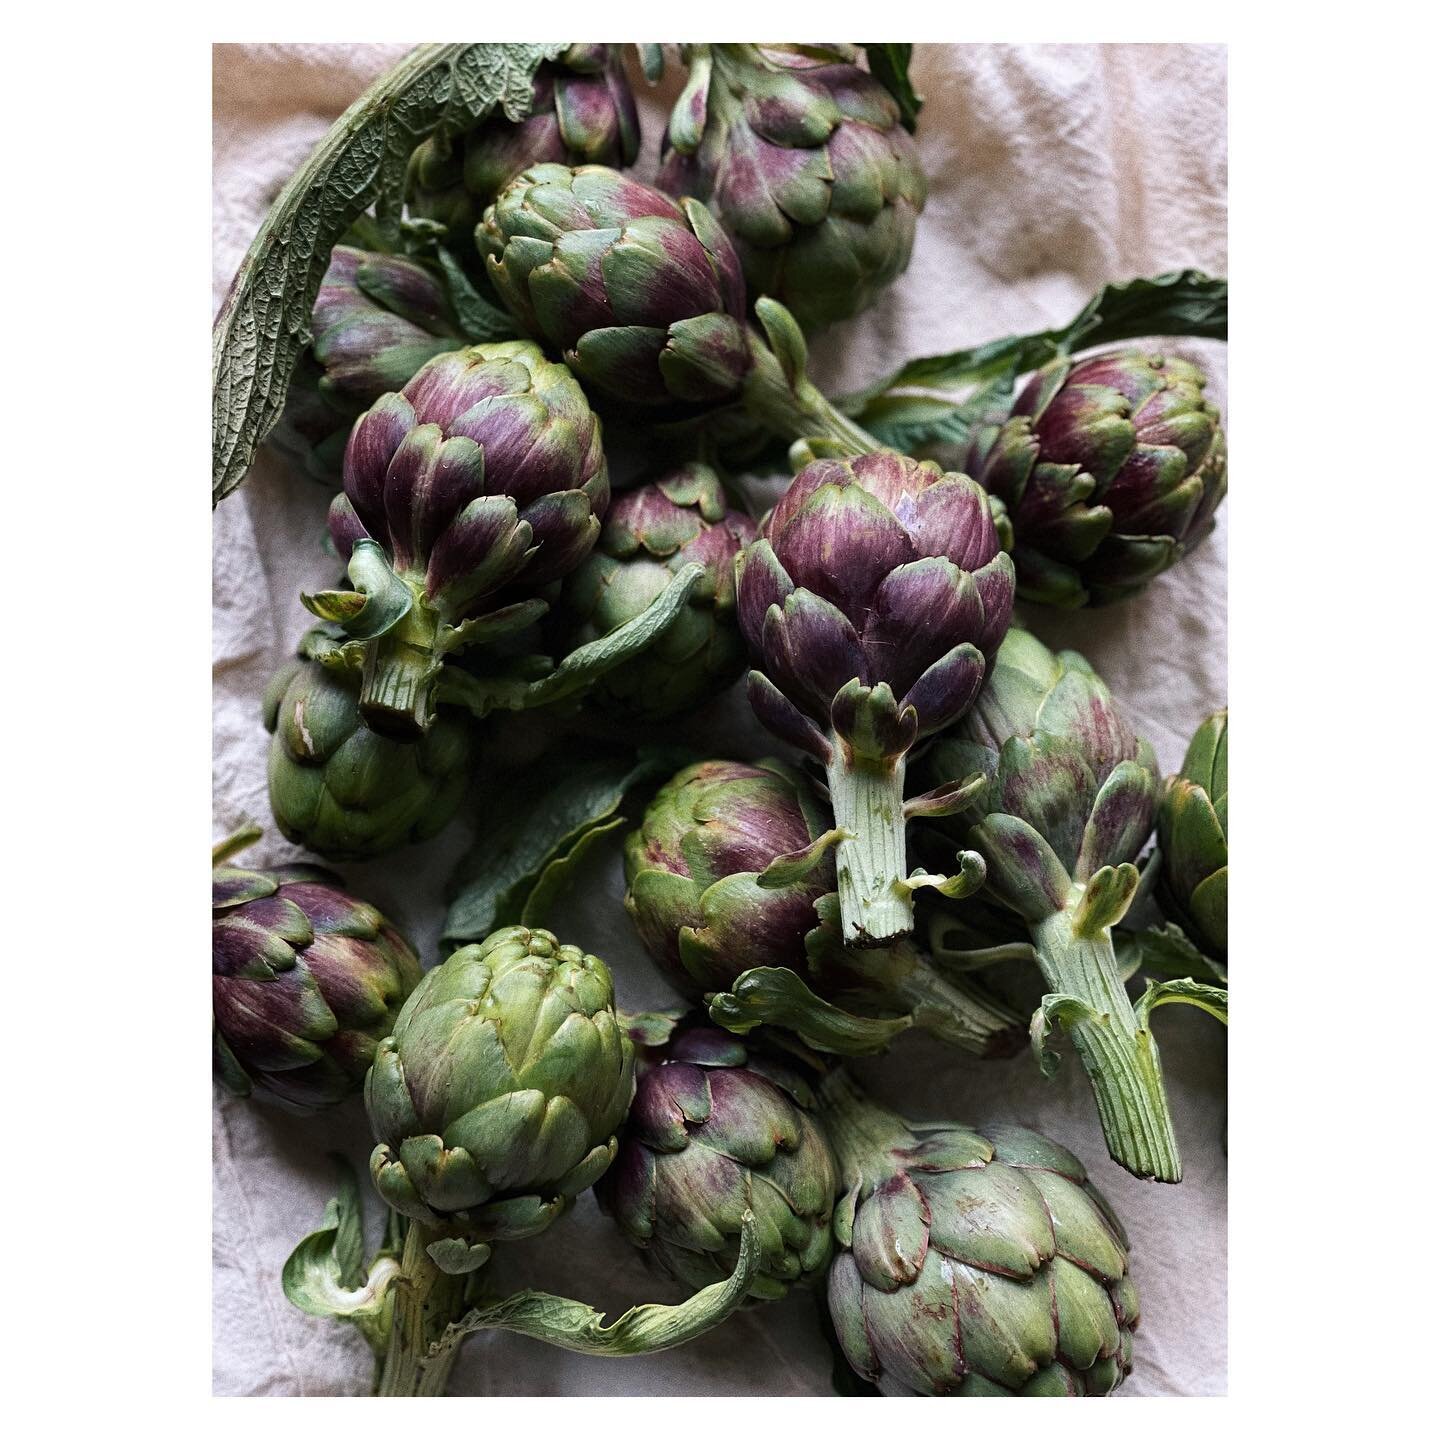 A few years back I was travelling through the mountains of Dalat in Vietnam when I discovered that artichoke tea was a staple of Vietnamese culture. I grew up eating them in every possible ways: raw, boiled, confit, fried, roasted in a open fire&hell